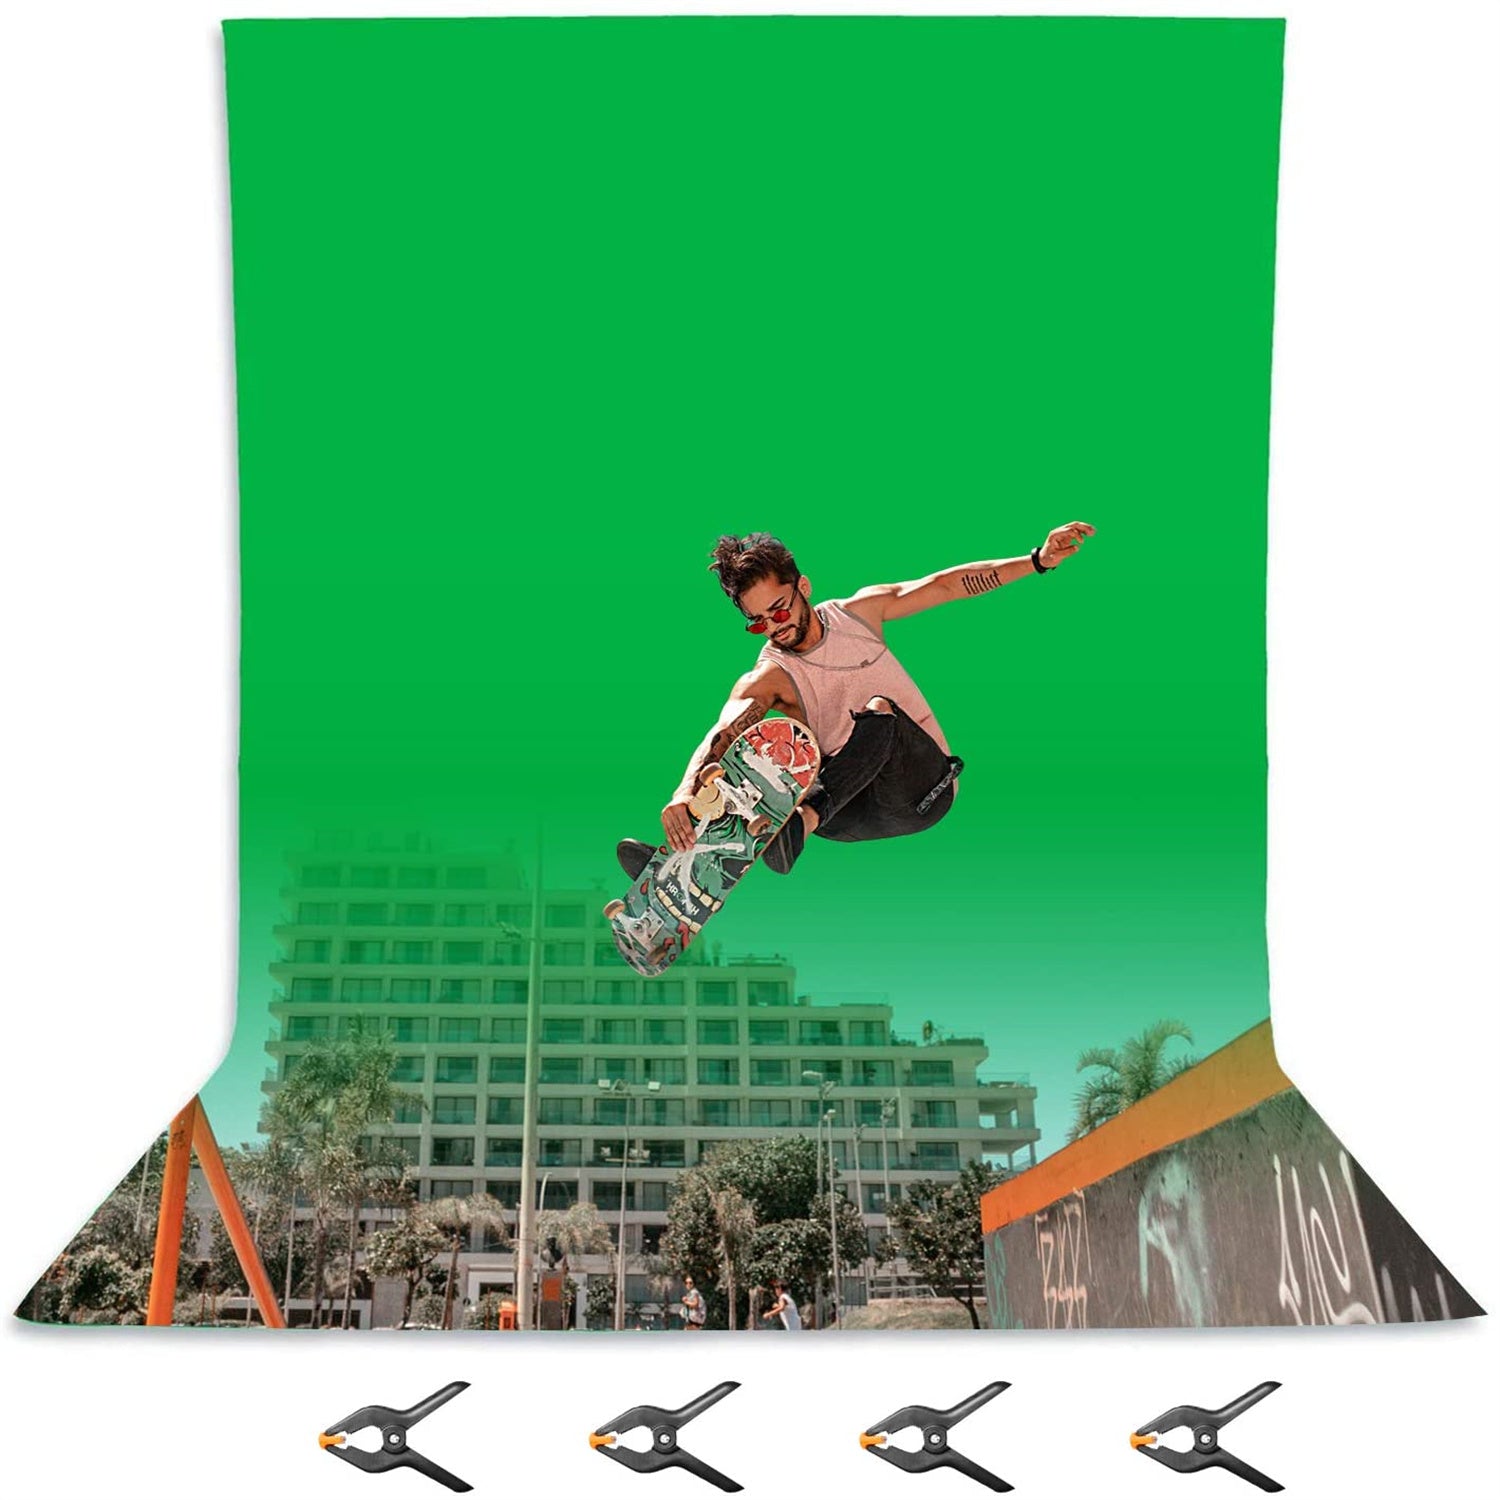 EMART Four Sizes Muslin Cloth Background, Photography Green Screen Backdrop with 4 Clamps